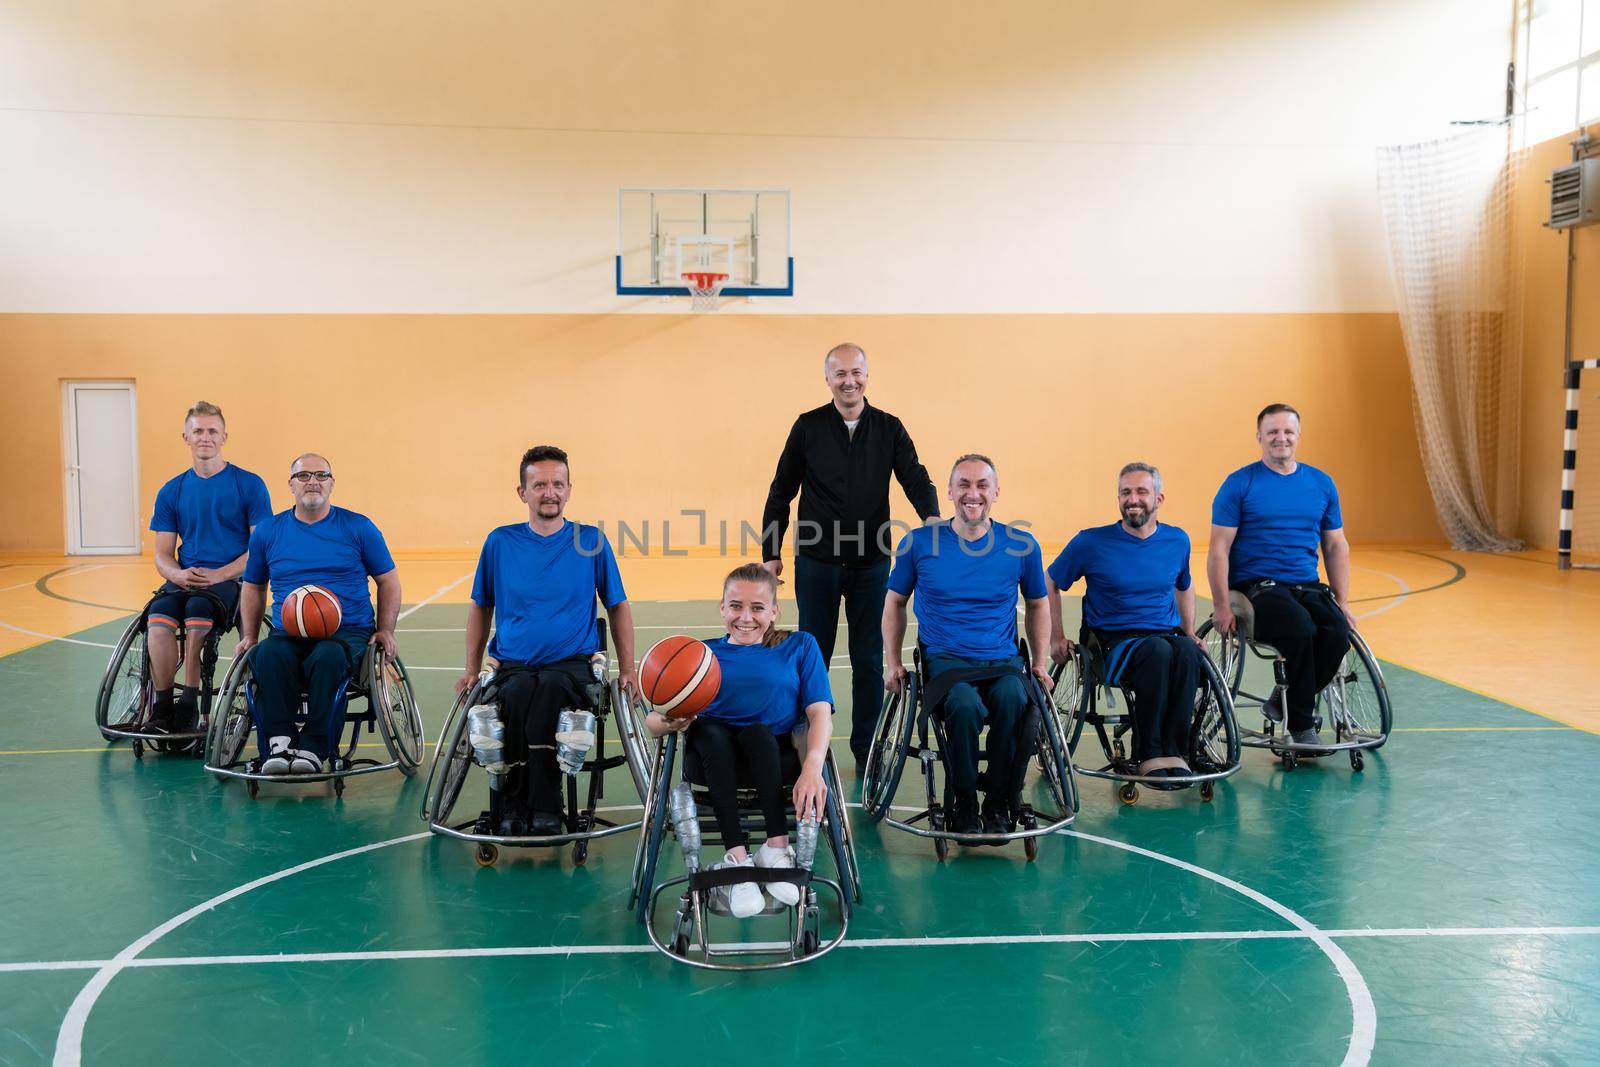  photo of the basketball team of war invalids with professional sports equipment for people with disabilities on the basketball court. High quality photo